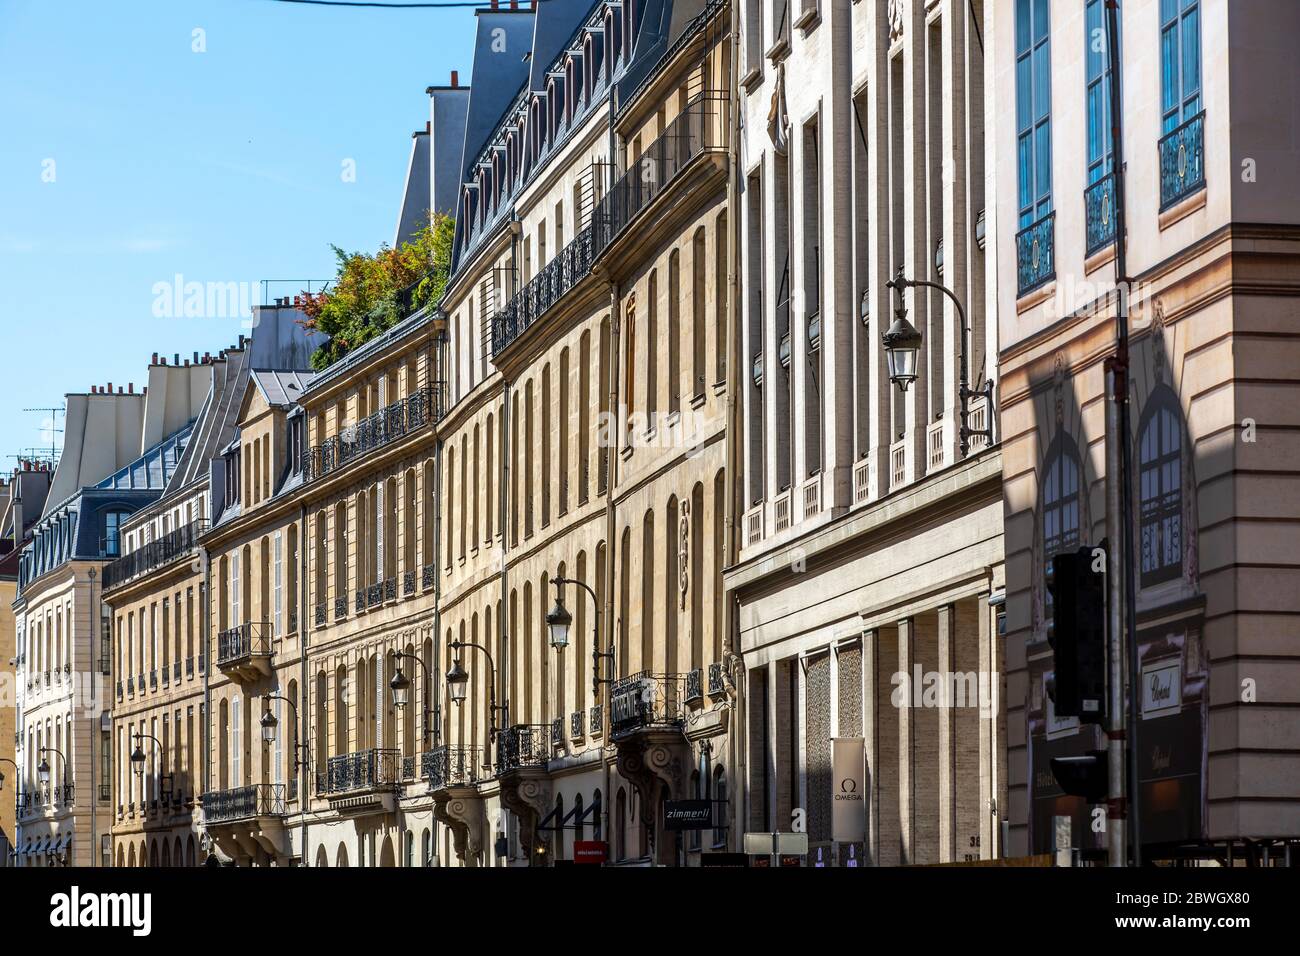 Paris, France - May 29, 2020: Attractive facades with geometry of the windows, charming typical building in Paris (Rue de Rivoli) Stock Photo